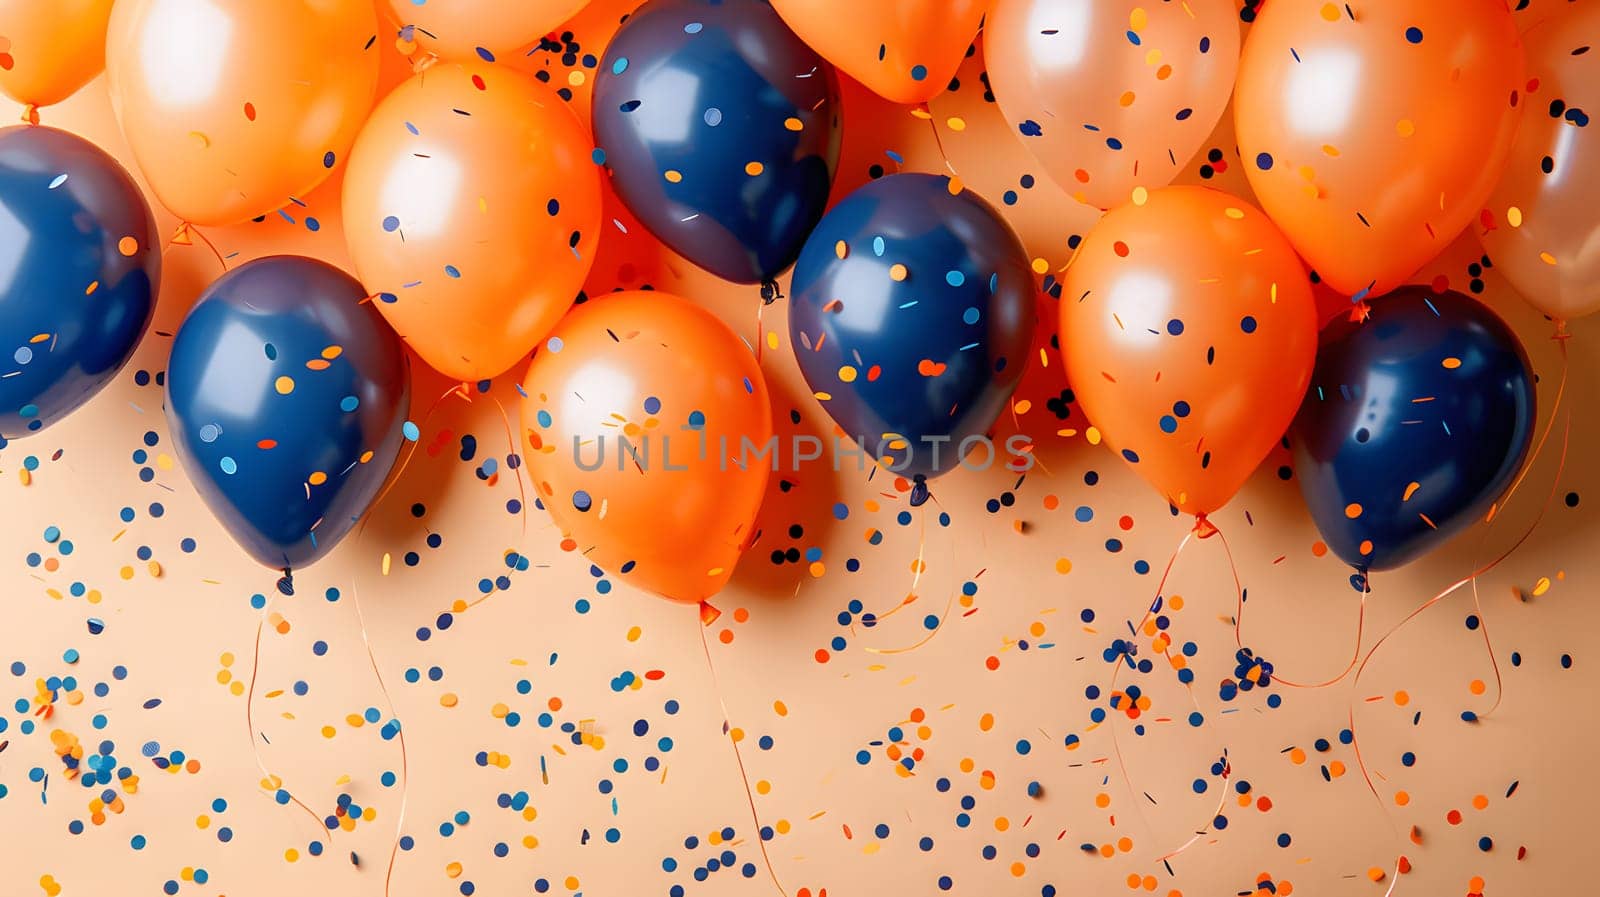 Colorful orange and electric blue balloons and confetti on a table by Nadtochiy